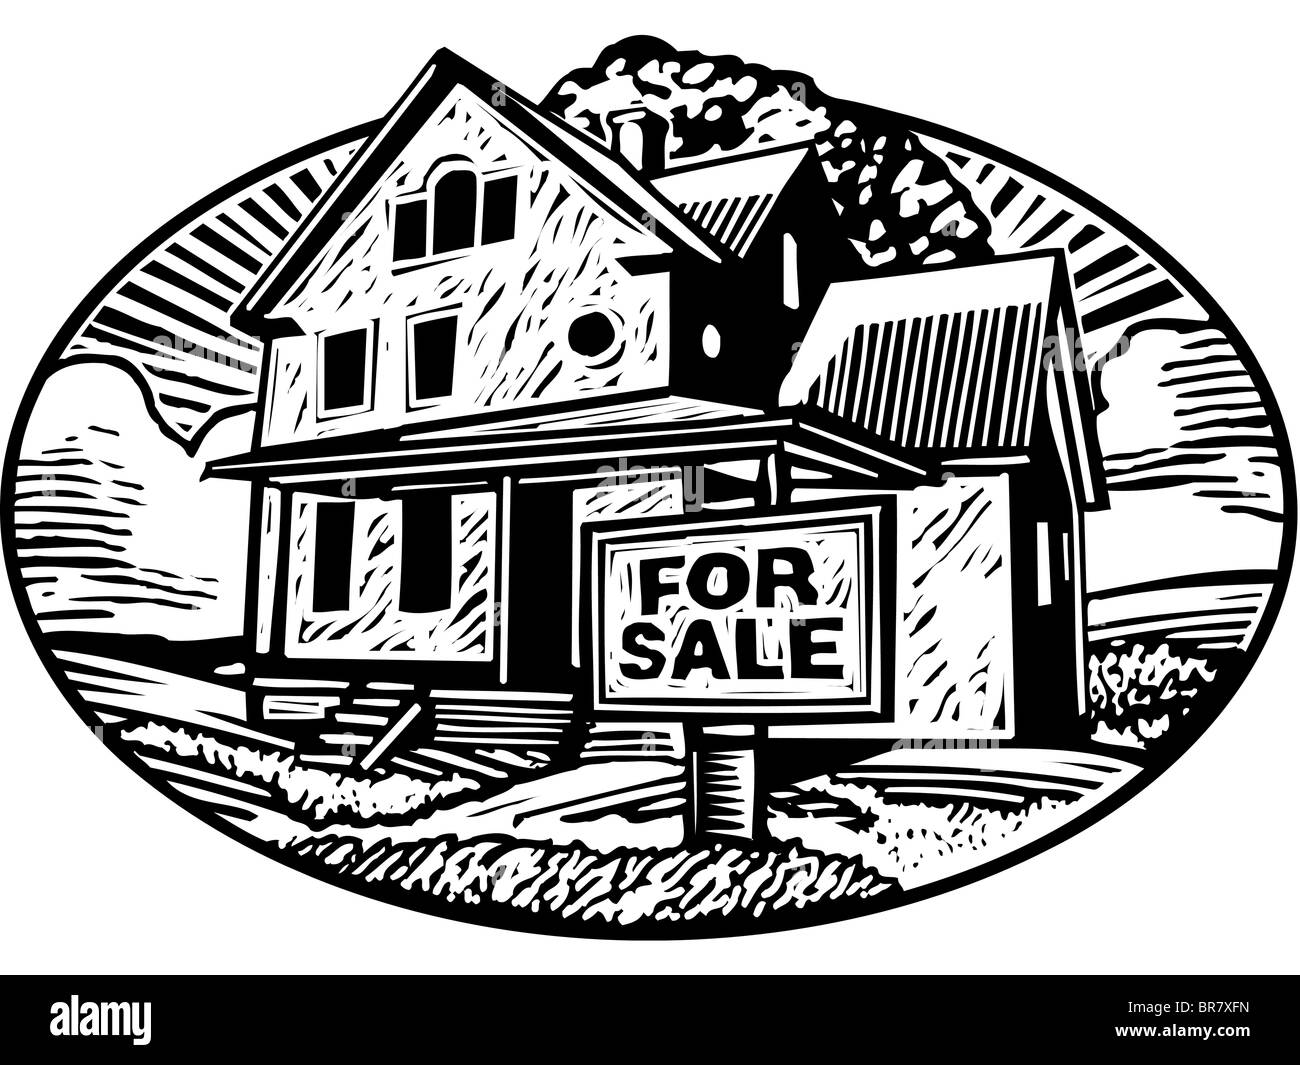 Oval shaped picture of a house with a for sale sign in front, black and white Stock Photo